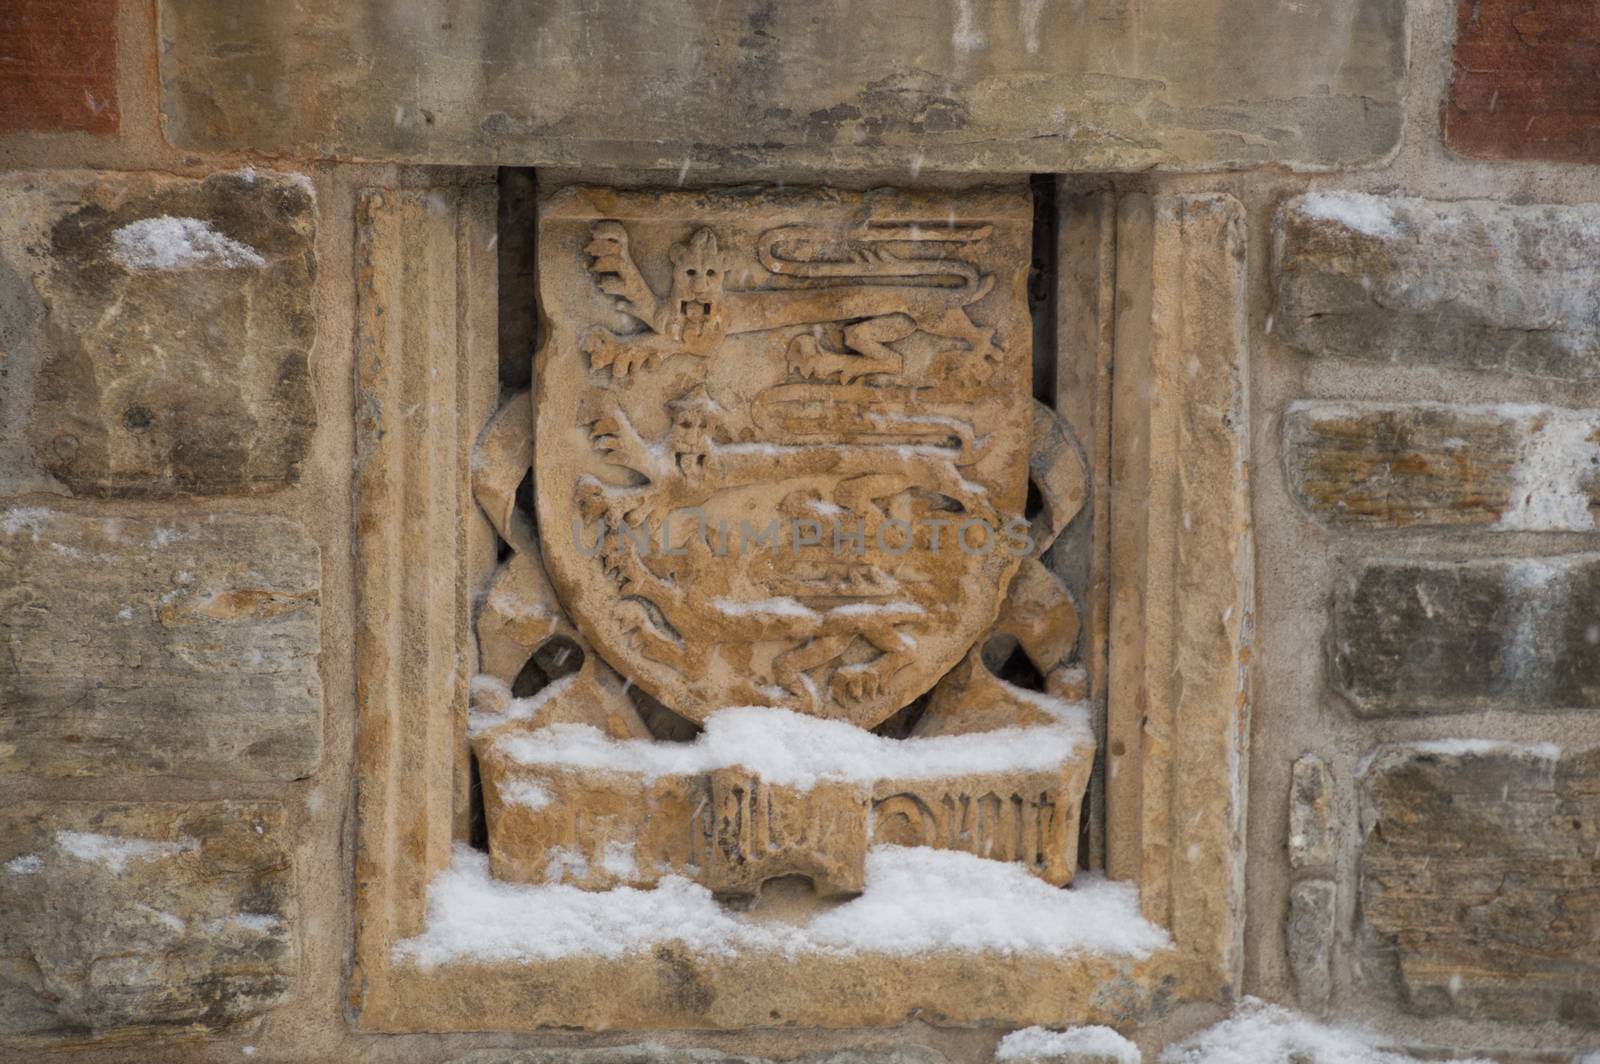 Coat of arms in the folly at the MacKenzie King estate, Gatineau Park. Snowing